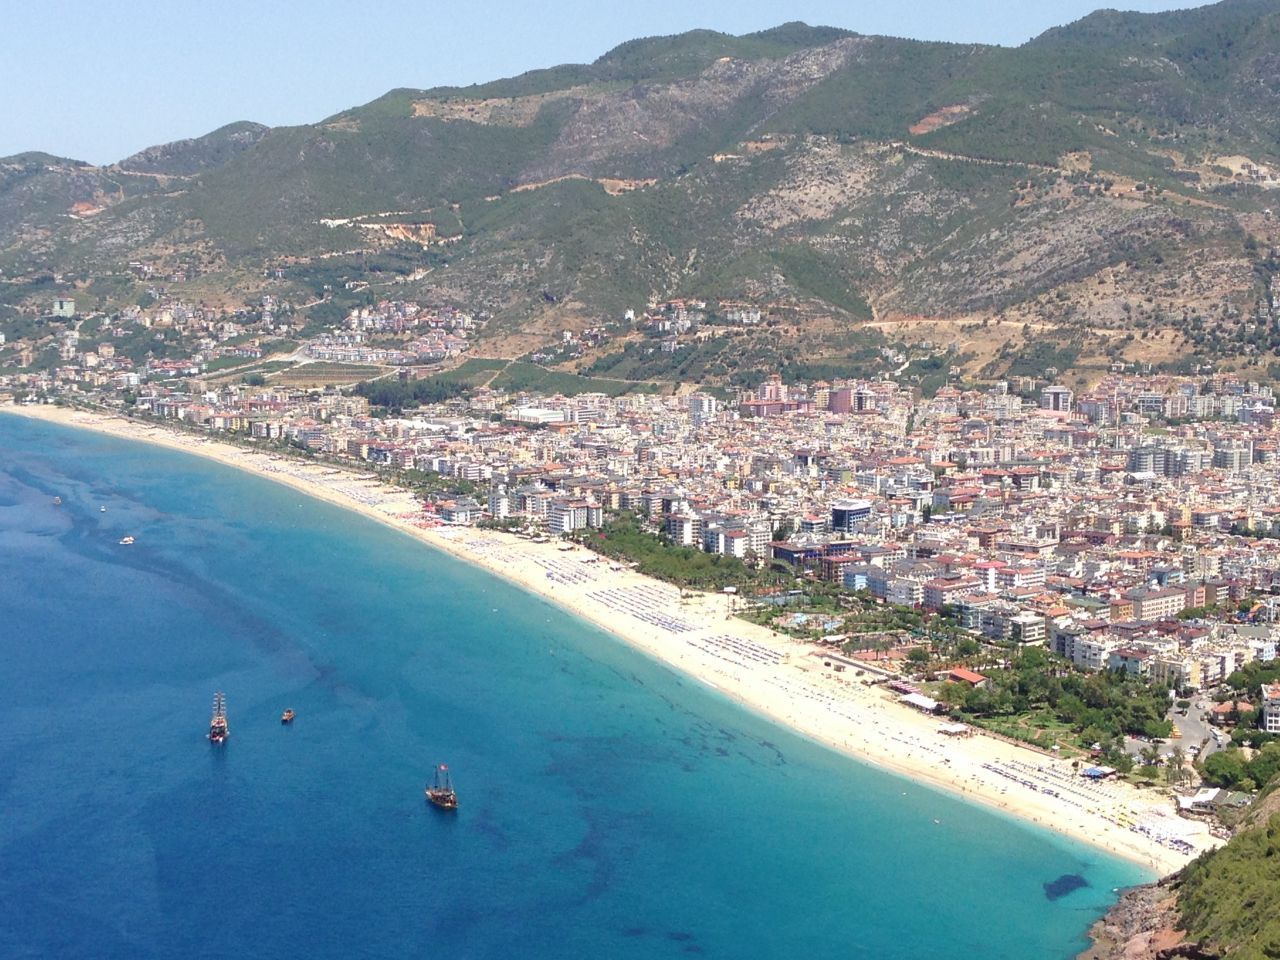 View from the Alanya Castle